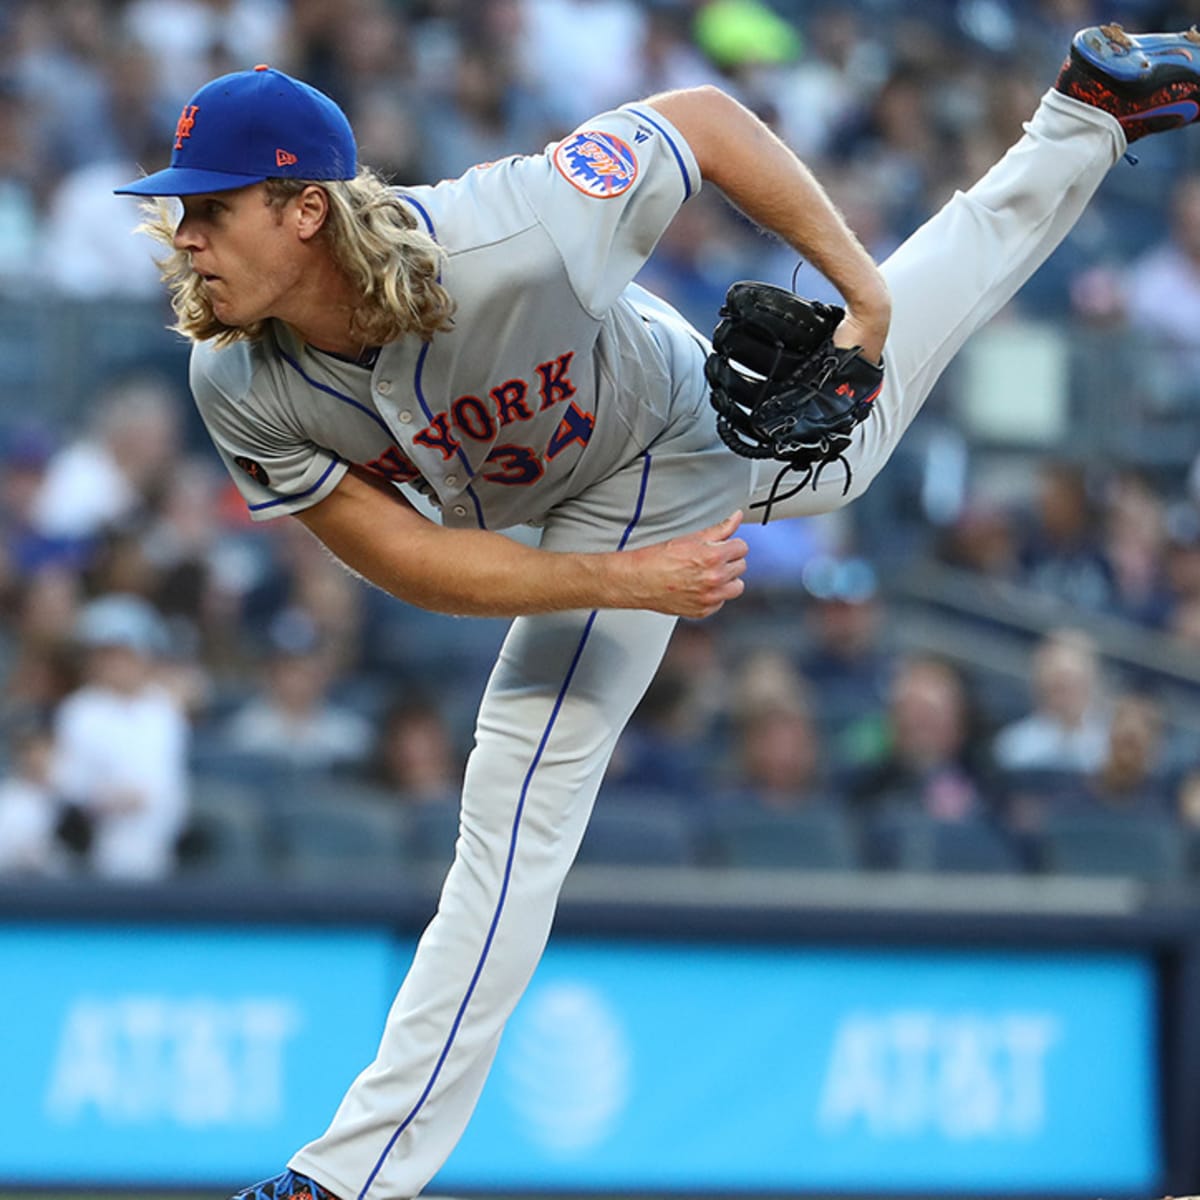 NY Mets place Noah Syndergaard on the disabled list